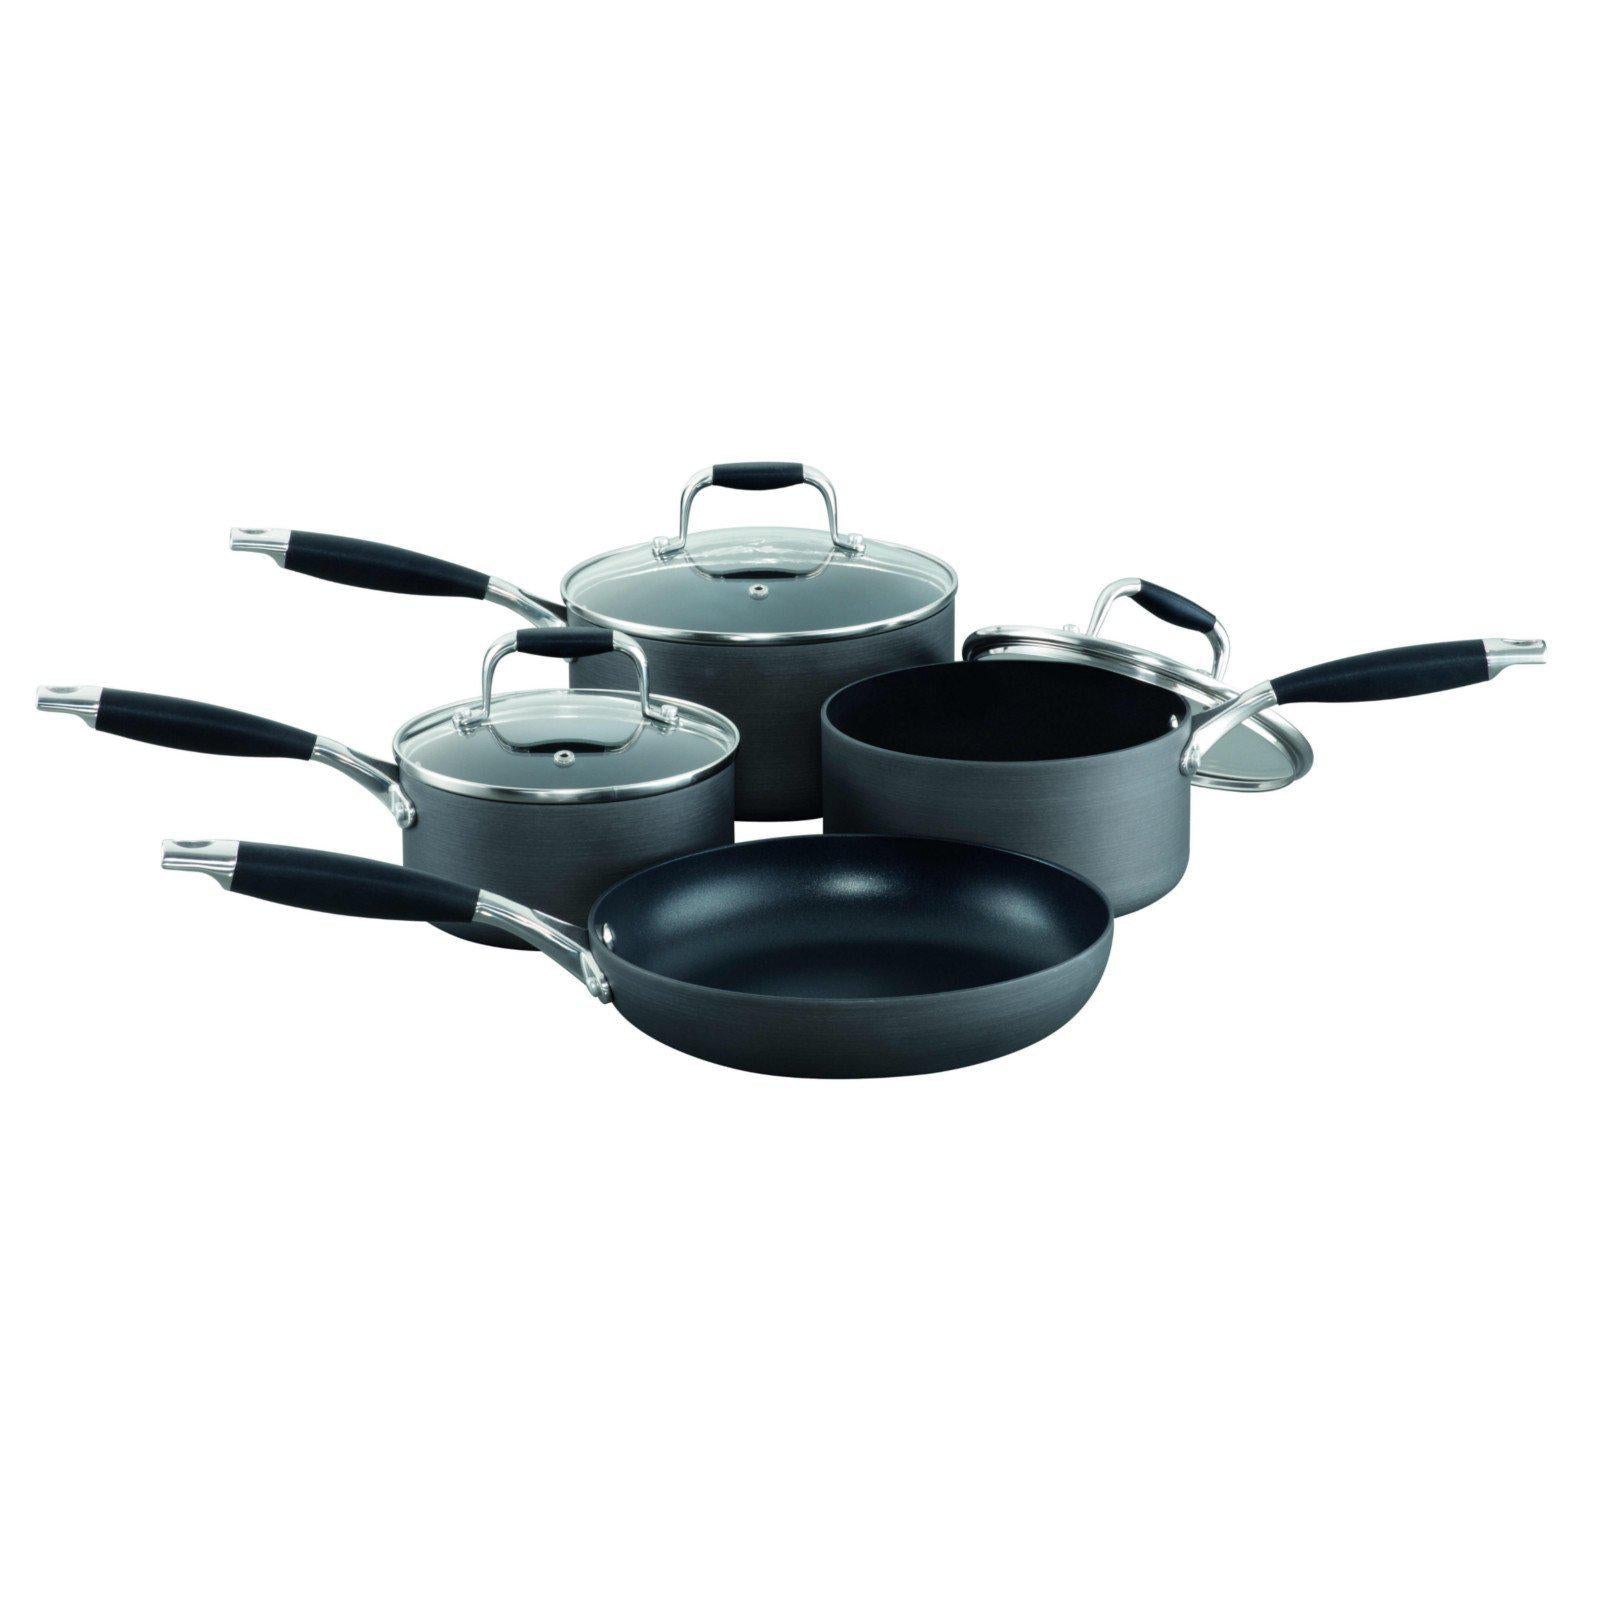 Blinq Elite 4pcs Hard Anodised Cookware Set with Glass Lids-Cookware Set-Chef's Quality Cookware